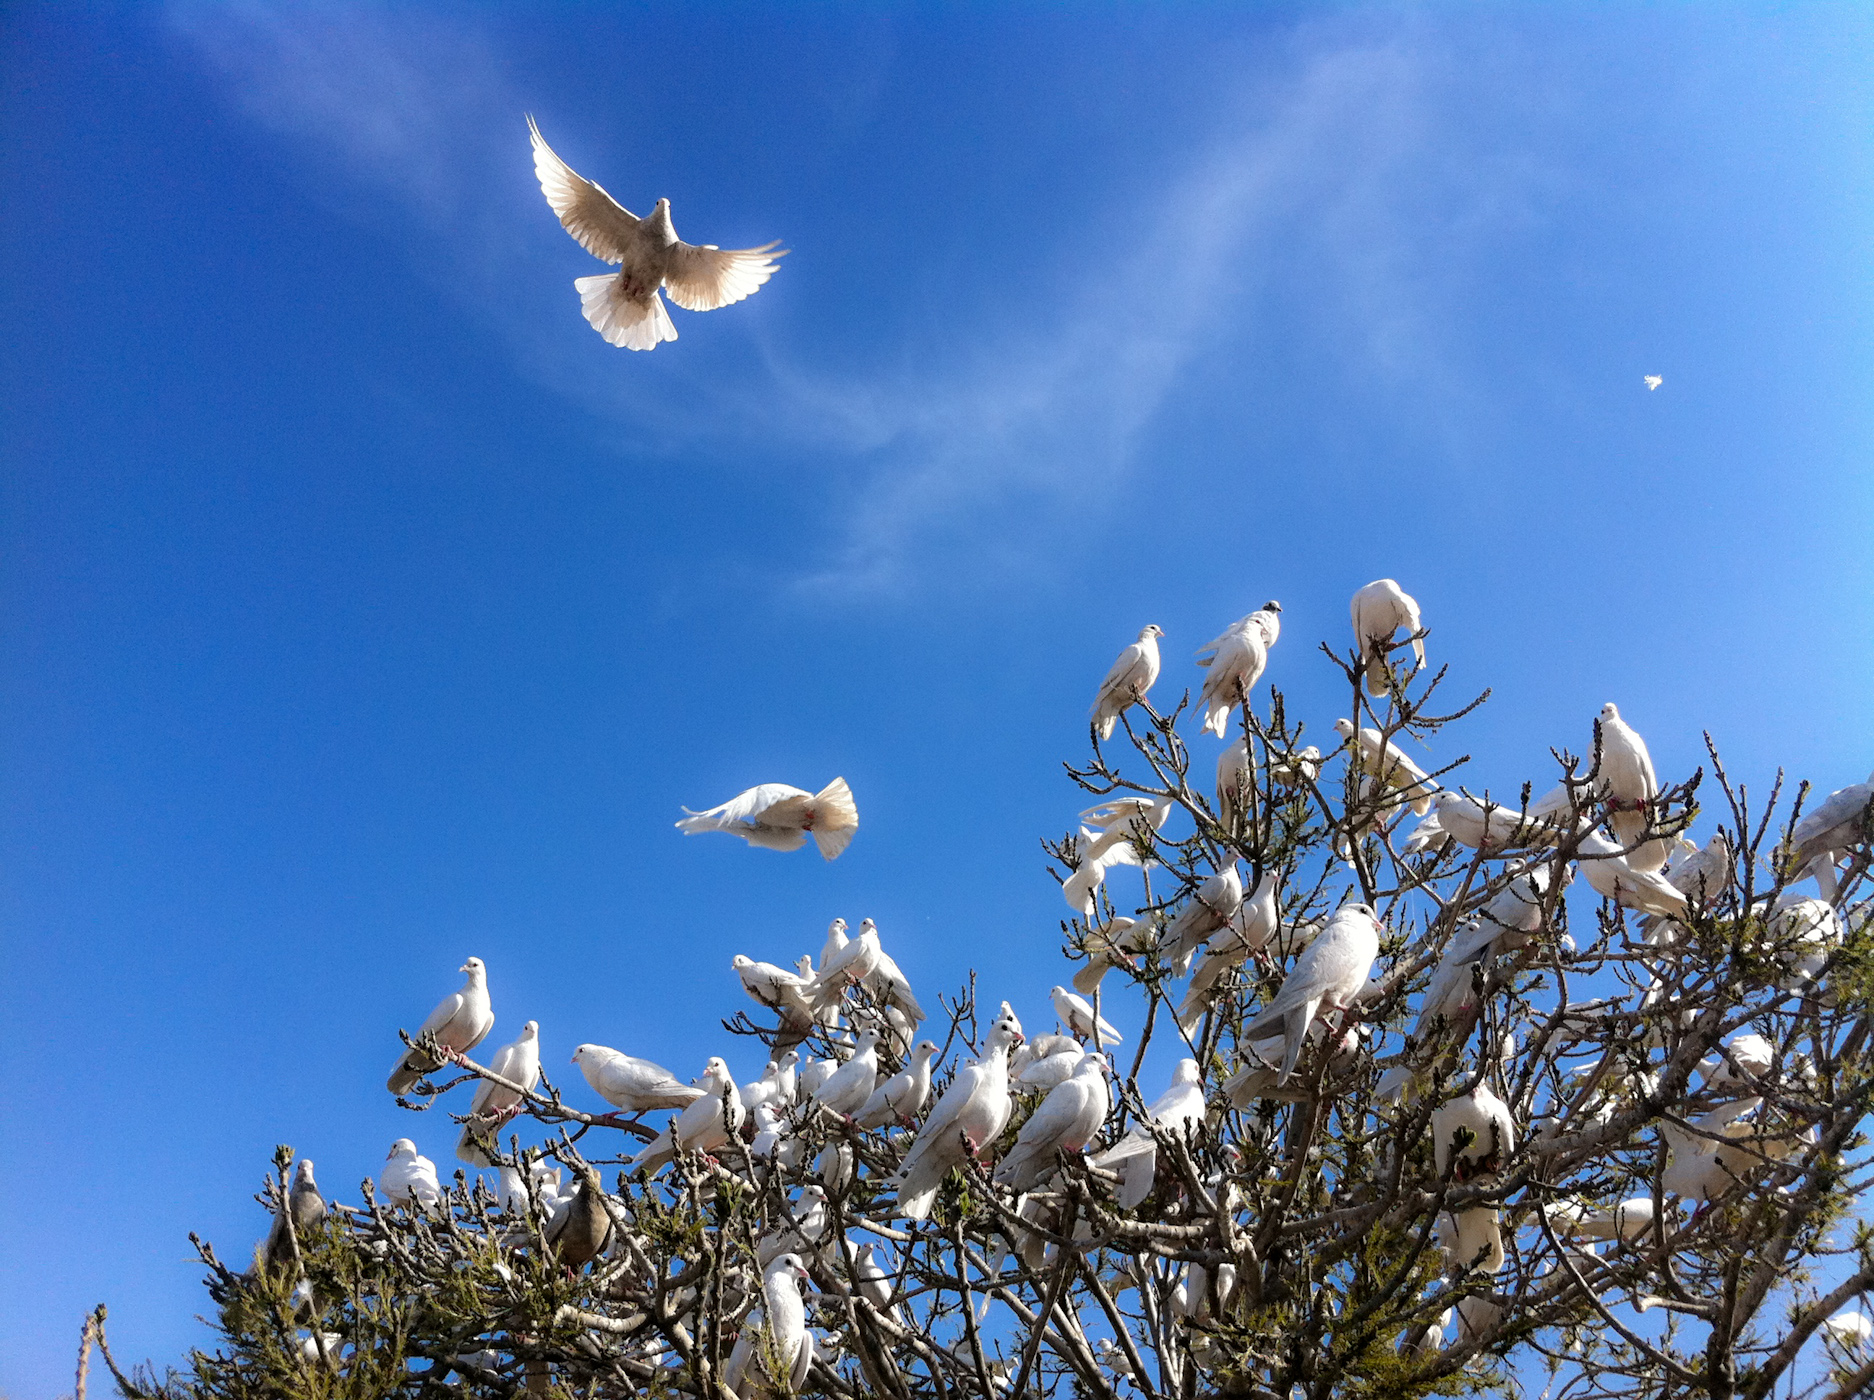 How did the White Dove start to be known as peace bird?